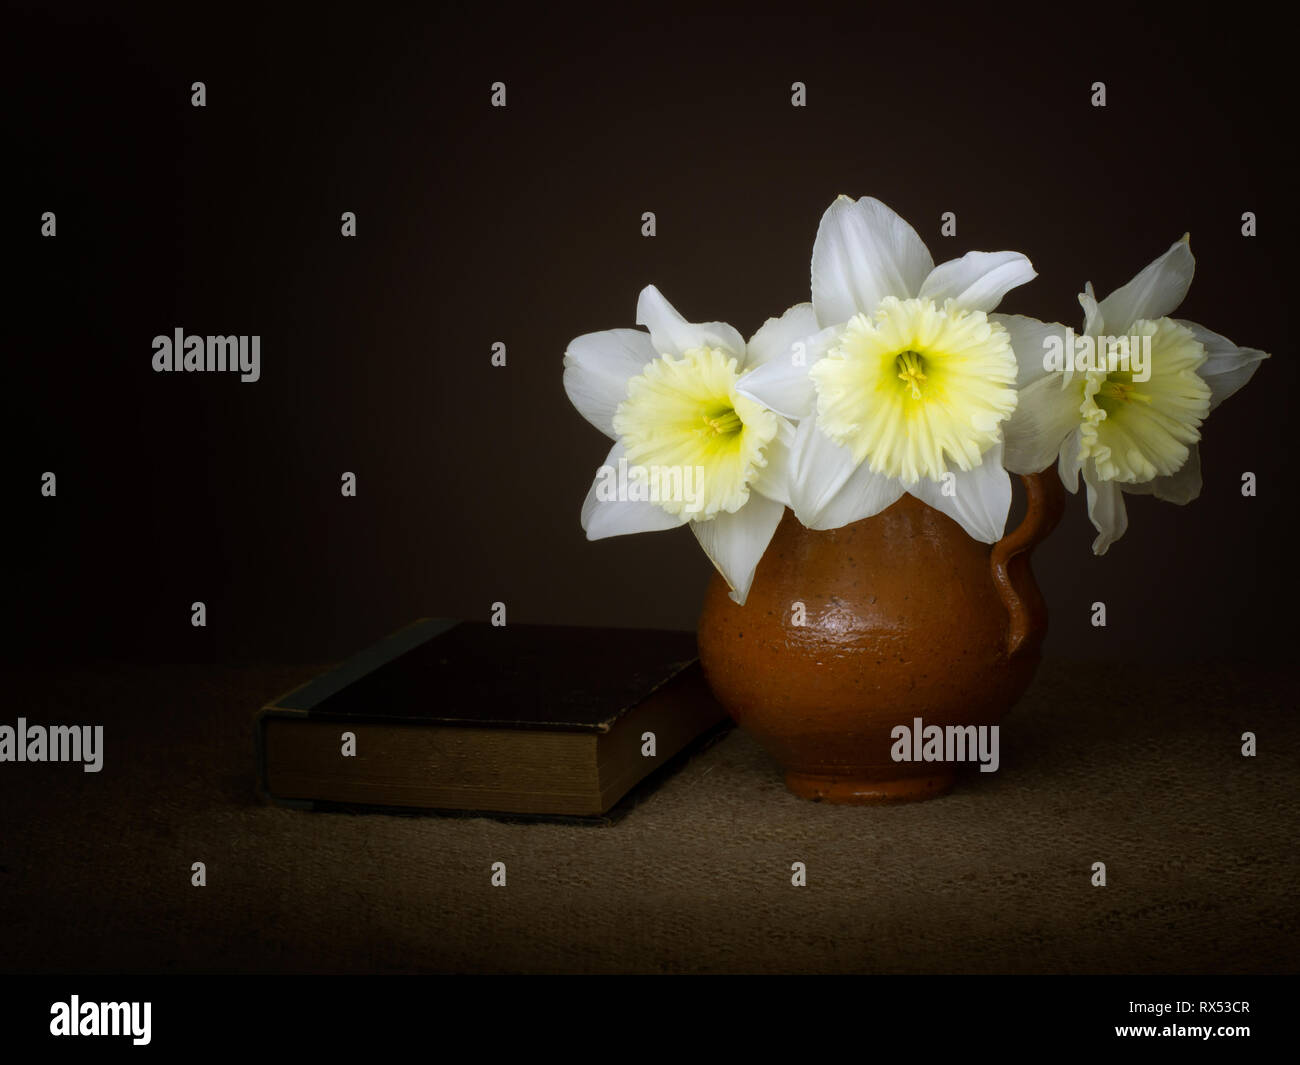 Vintage style still life of pale and beautiful daffodil, narcissus flowers, jug and book. Chiariscuro light painting. Stock Photo